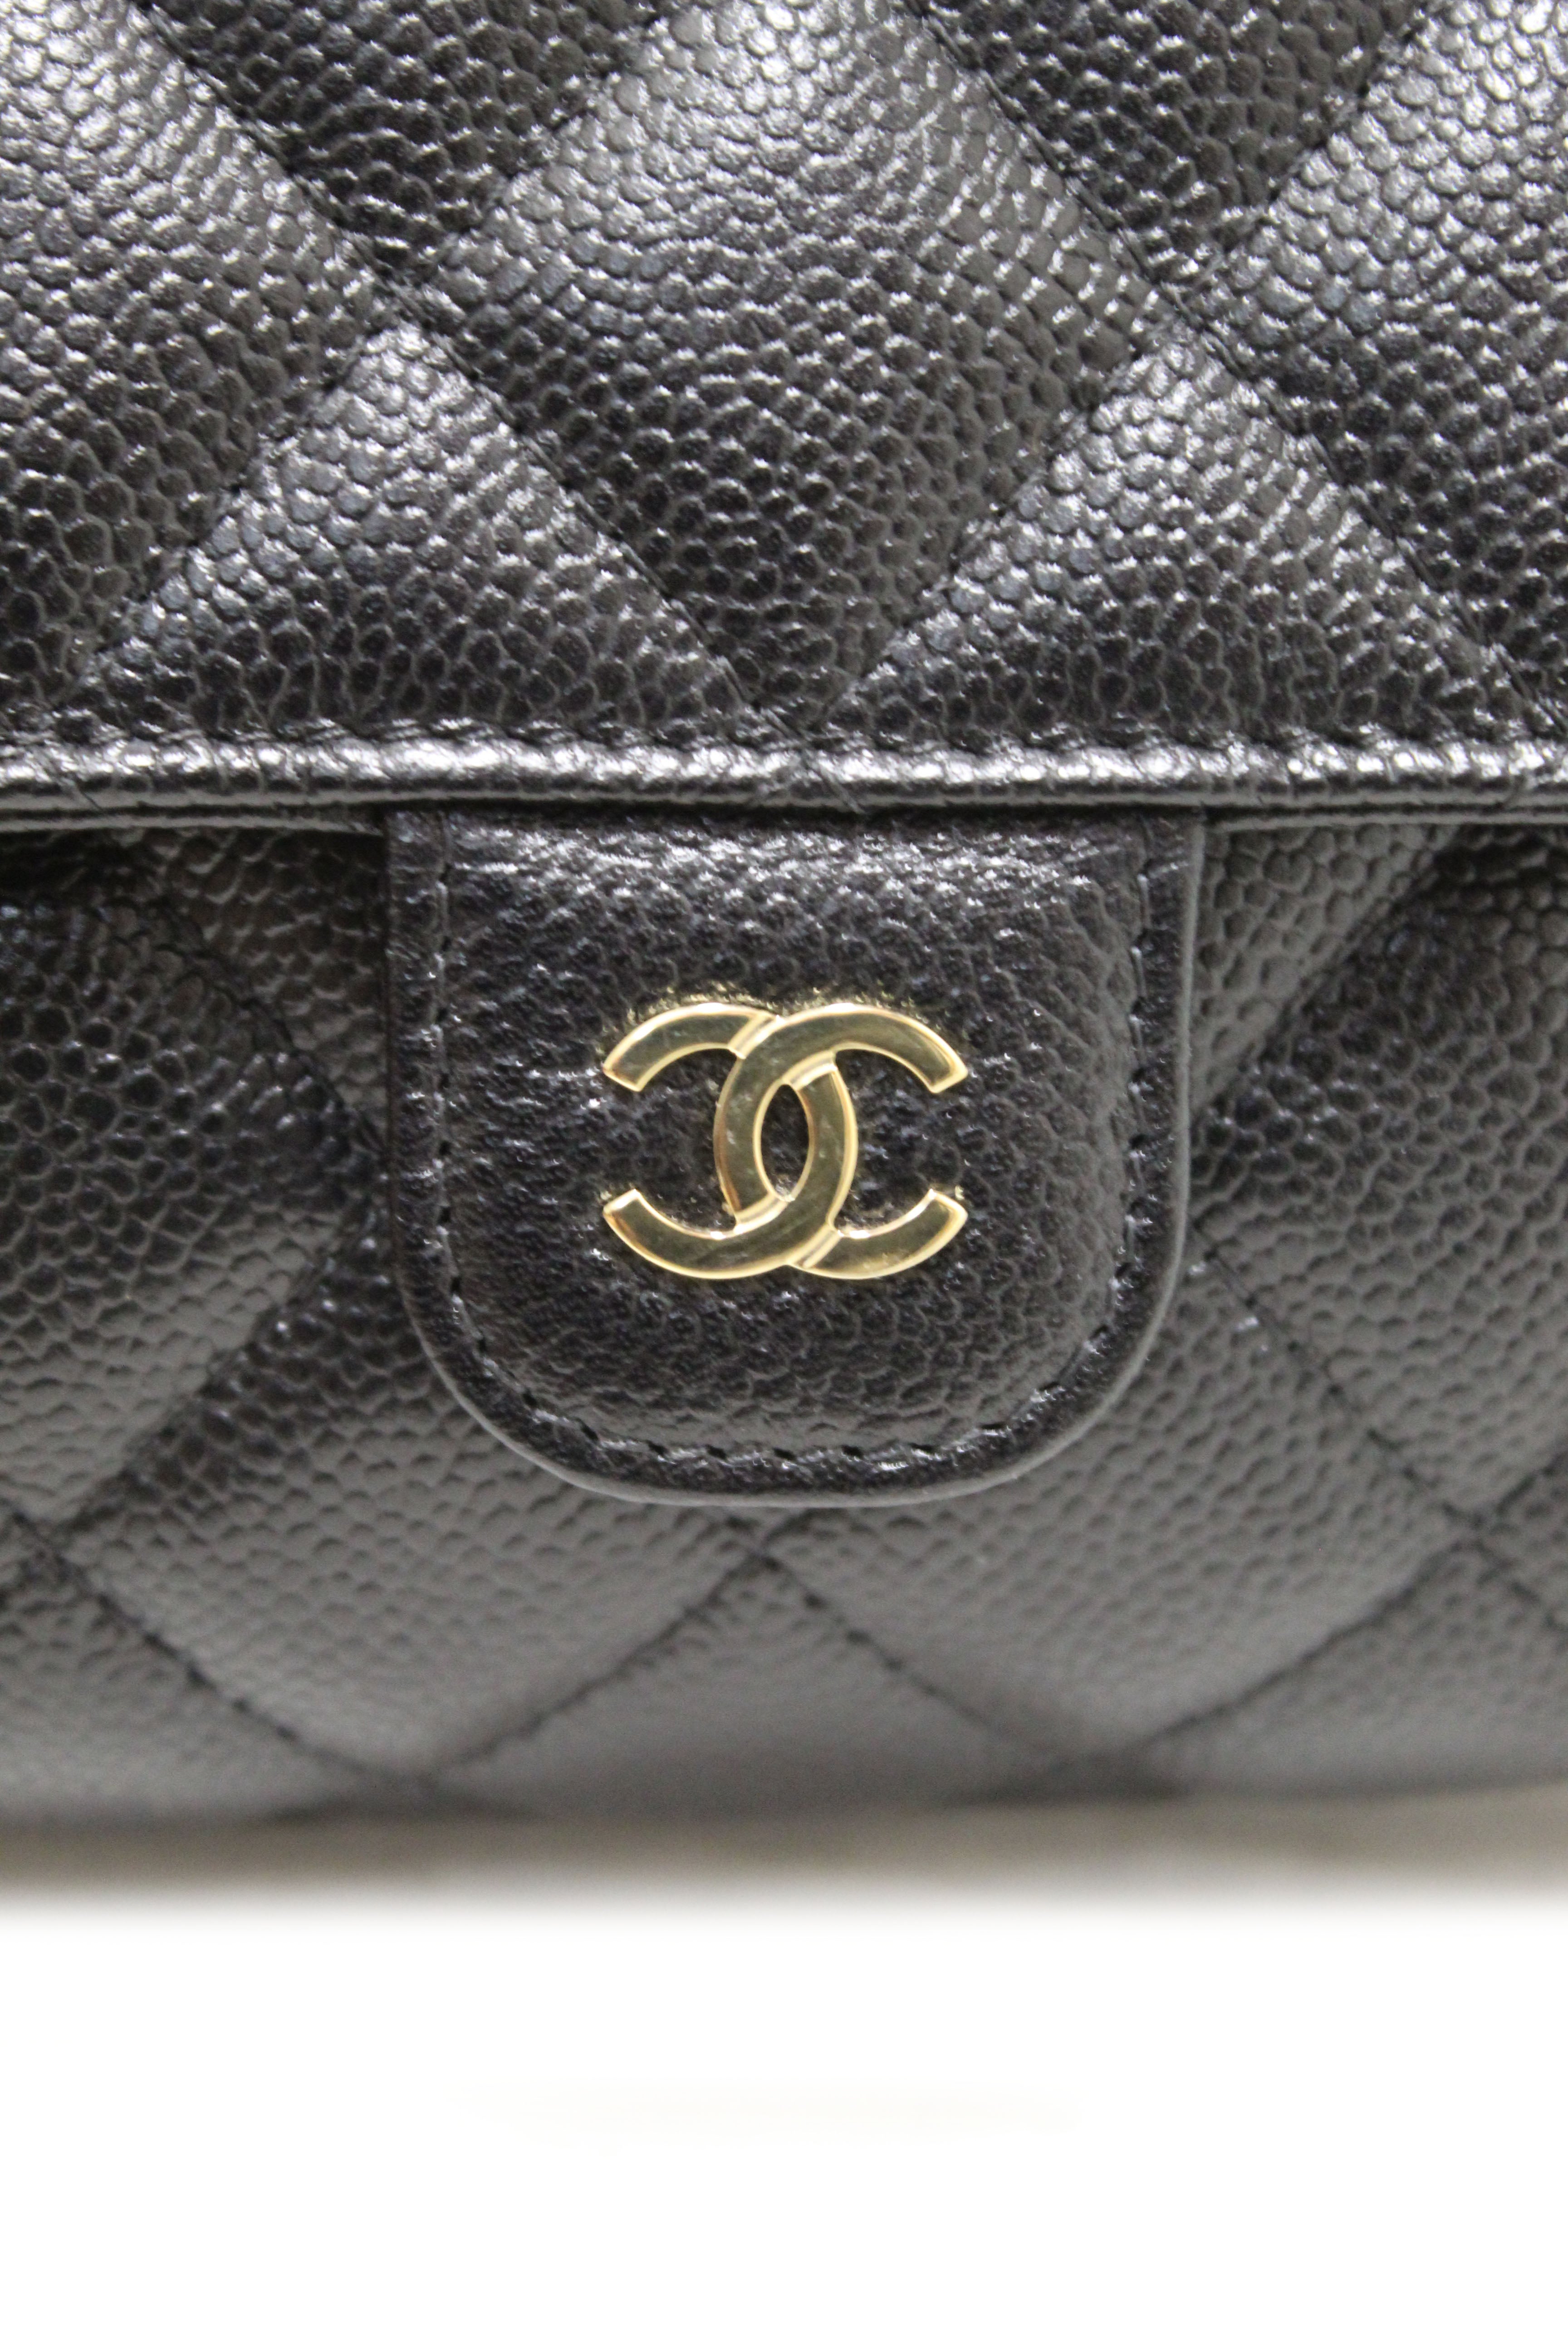 Authentic Chanel Black Caviar Quilted Leather Phone Bag On Chain Cross –  Paris Station Shop